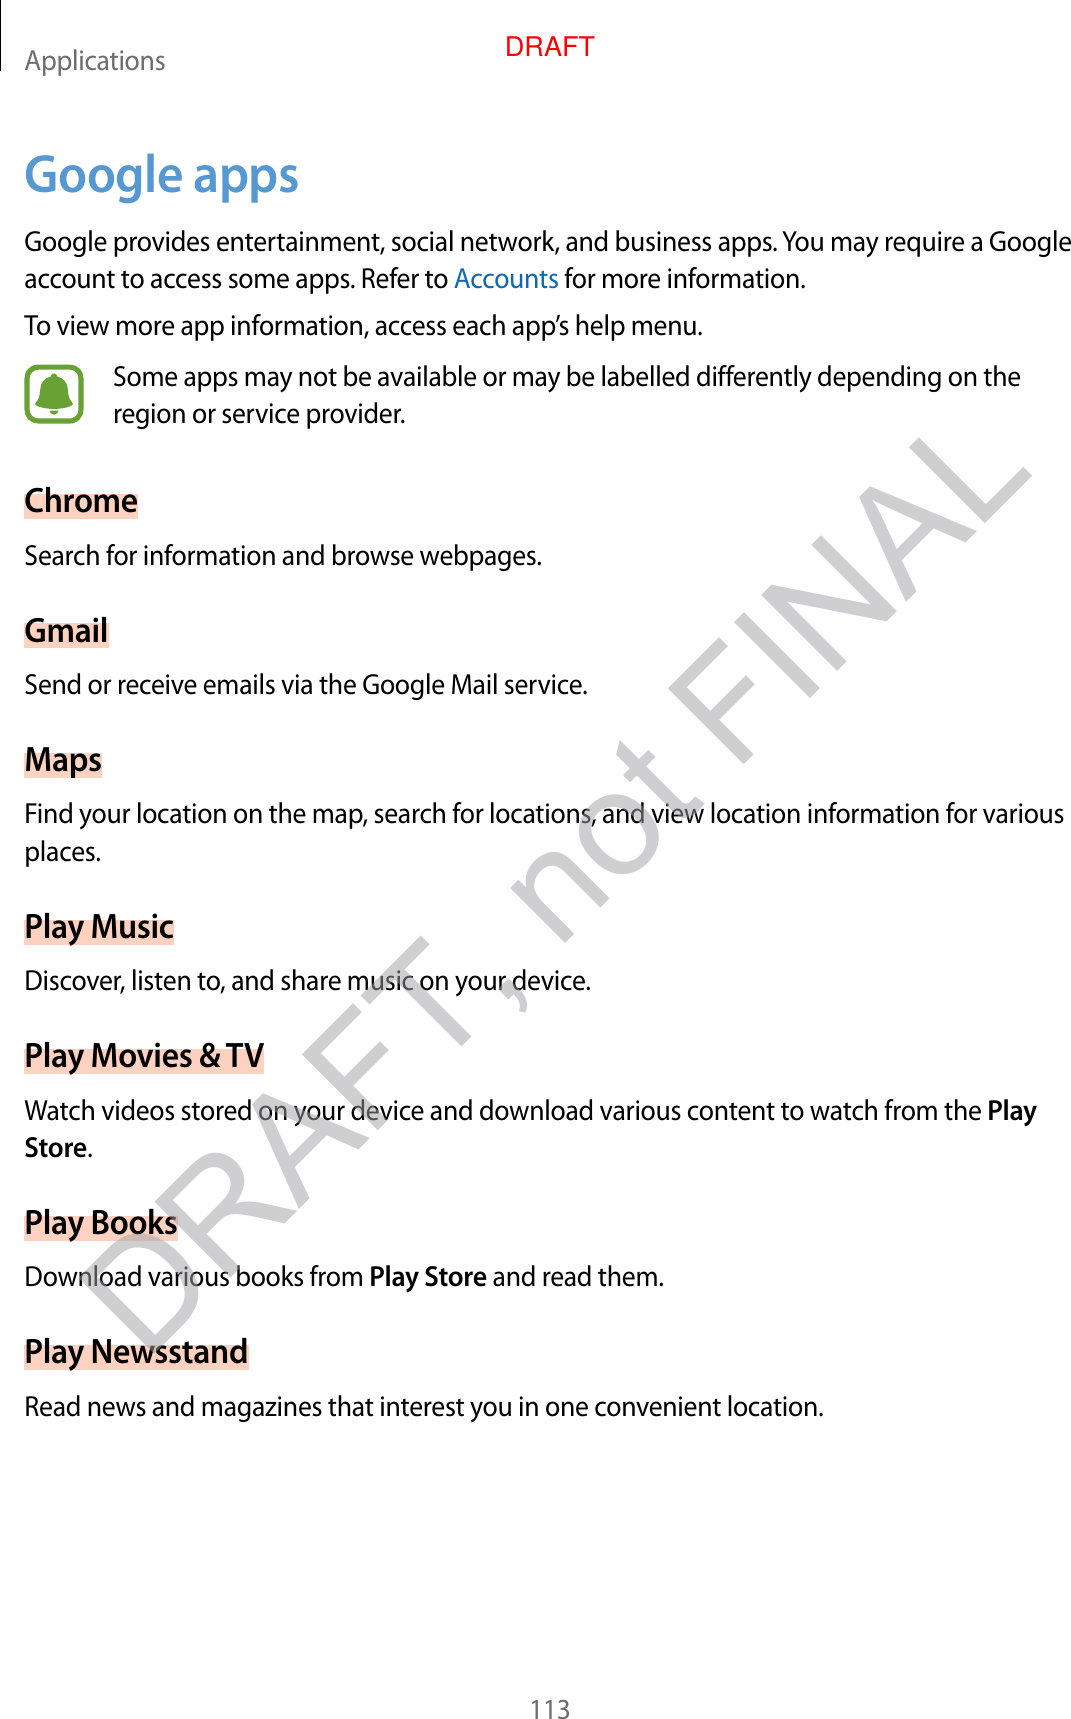 Applications113Google appsGoogle provides entertainment, social network, and business apps. You may require a Google account to access some apps. Refer to Accounts for more information.To view more app information, access each app’s help menu.Some apps may not be available or may be labelled differently depending on the region or service provider.ChromeSearch for information and browse webpages.GmailSend or receive emails via the Google Mail service.MapsFind your location on the map, search for locations, and view location information for various places.Play MusicDiscover, listen to, and share music on your device.Play Movies &amp; TVWatch videos stored on your device and download various content to watch from the Play Store.Play BooksDownload various books from Play Store and read them.Play NewsstandRead news and magazines that interest you in one convenient location.DRAFT, not FINALDRAFT